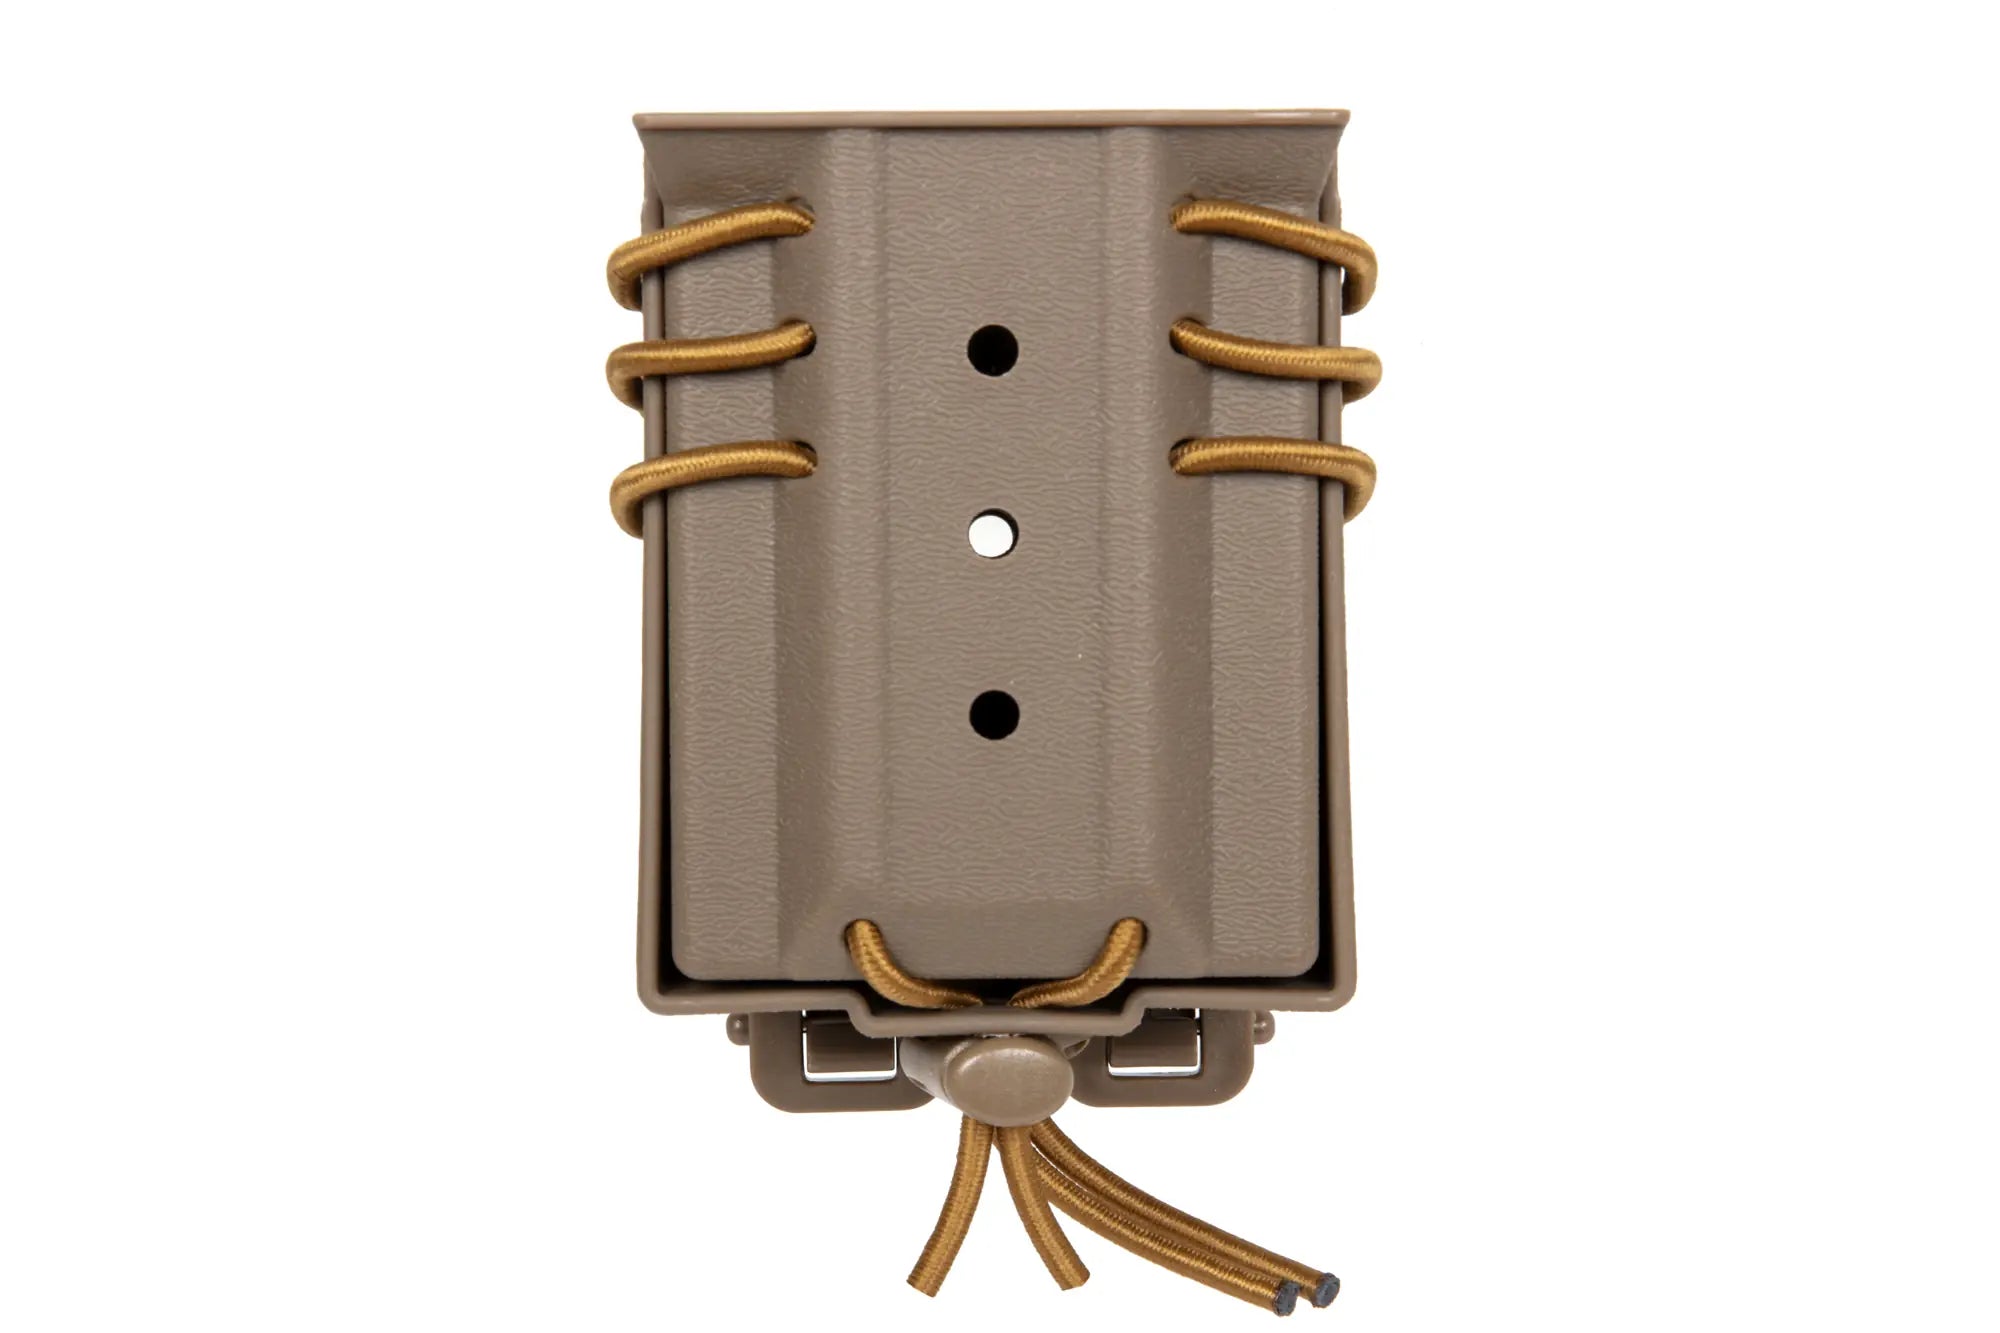 Carrier for 2 M4/M16 magazines Wosport Urban Assault Quick Pull Tan